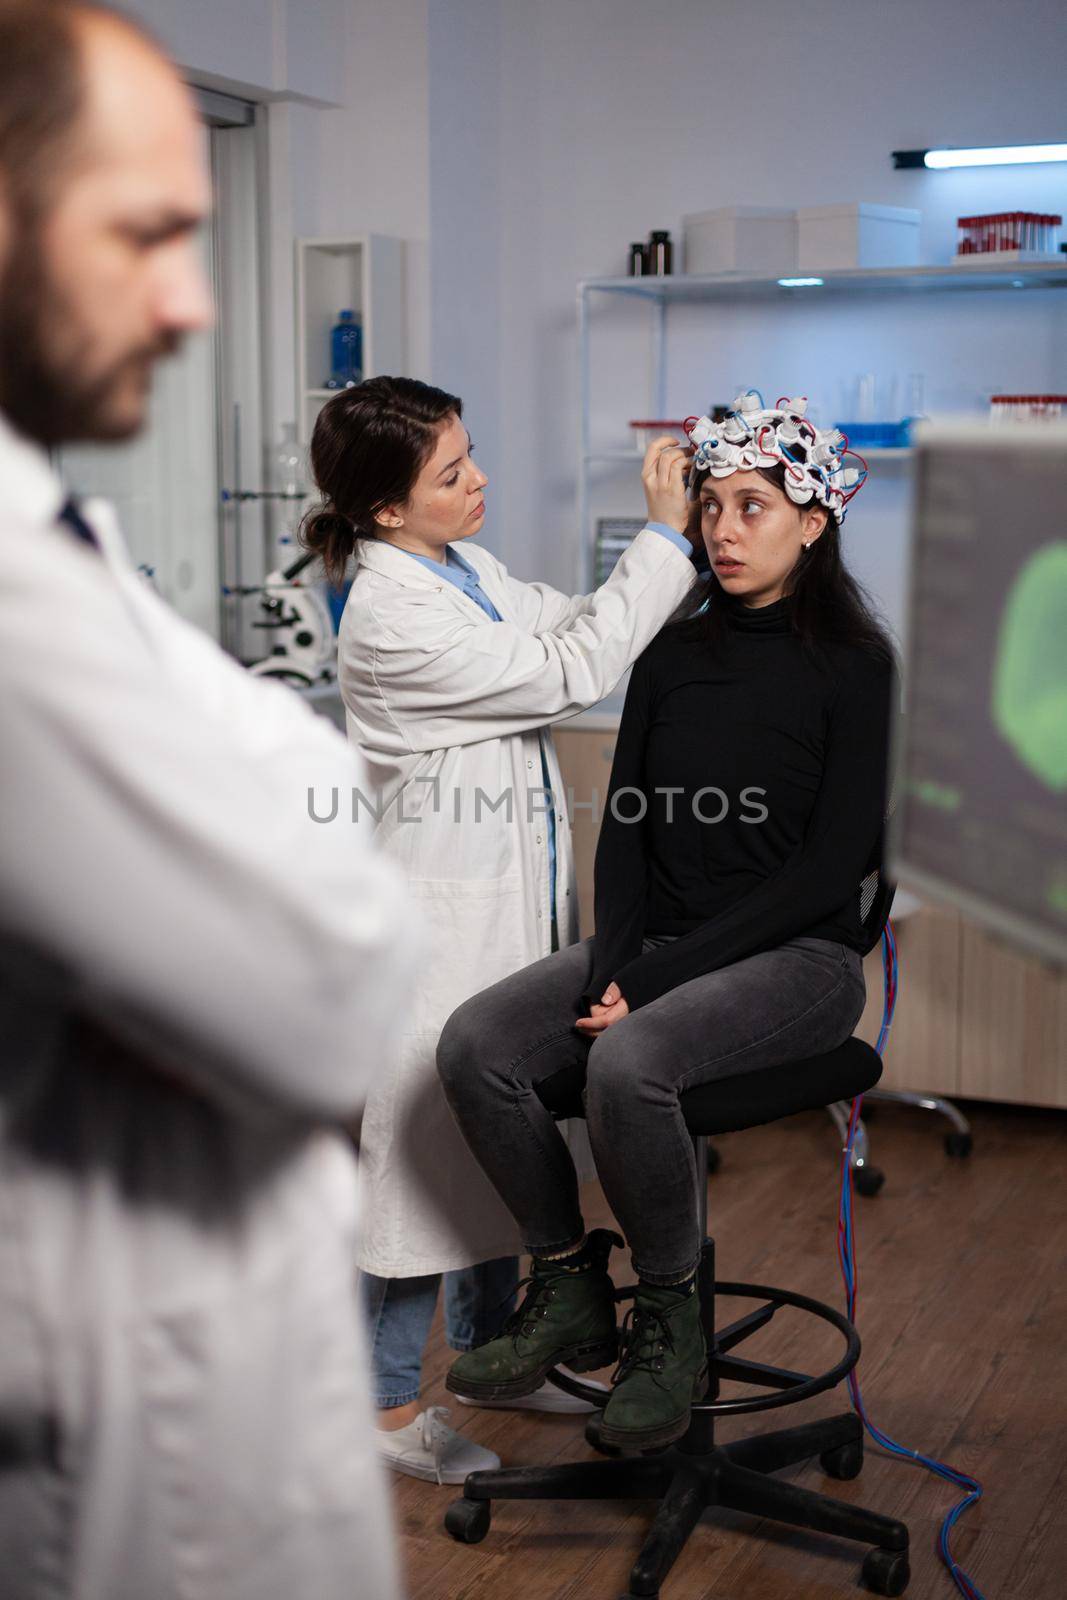 Neurologist doctor analyzing nervous system activity on monitor while specialist doctor adjusting eeg scanner of woman patient during neurology experiment. Medical team monitoring brain evolution